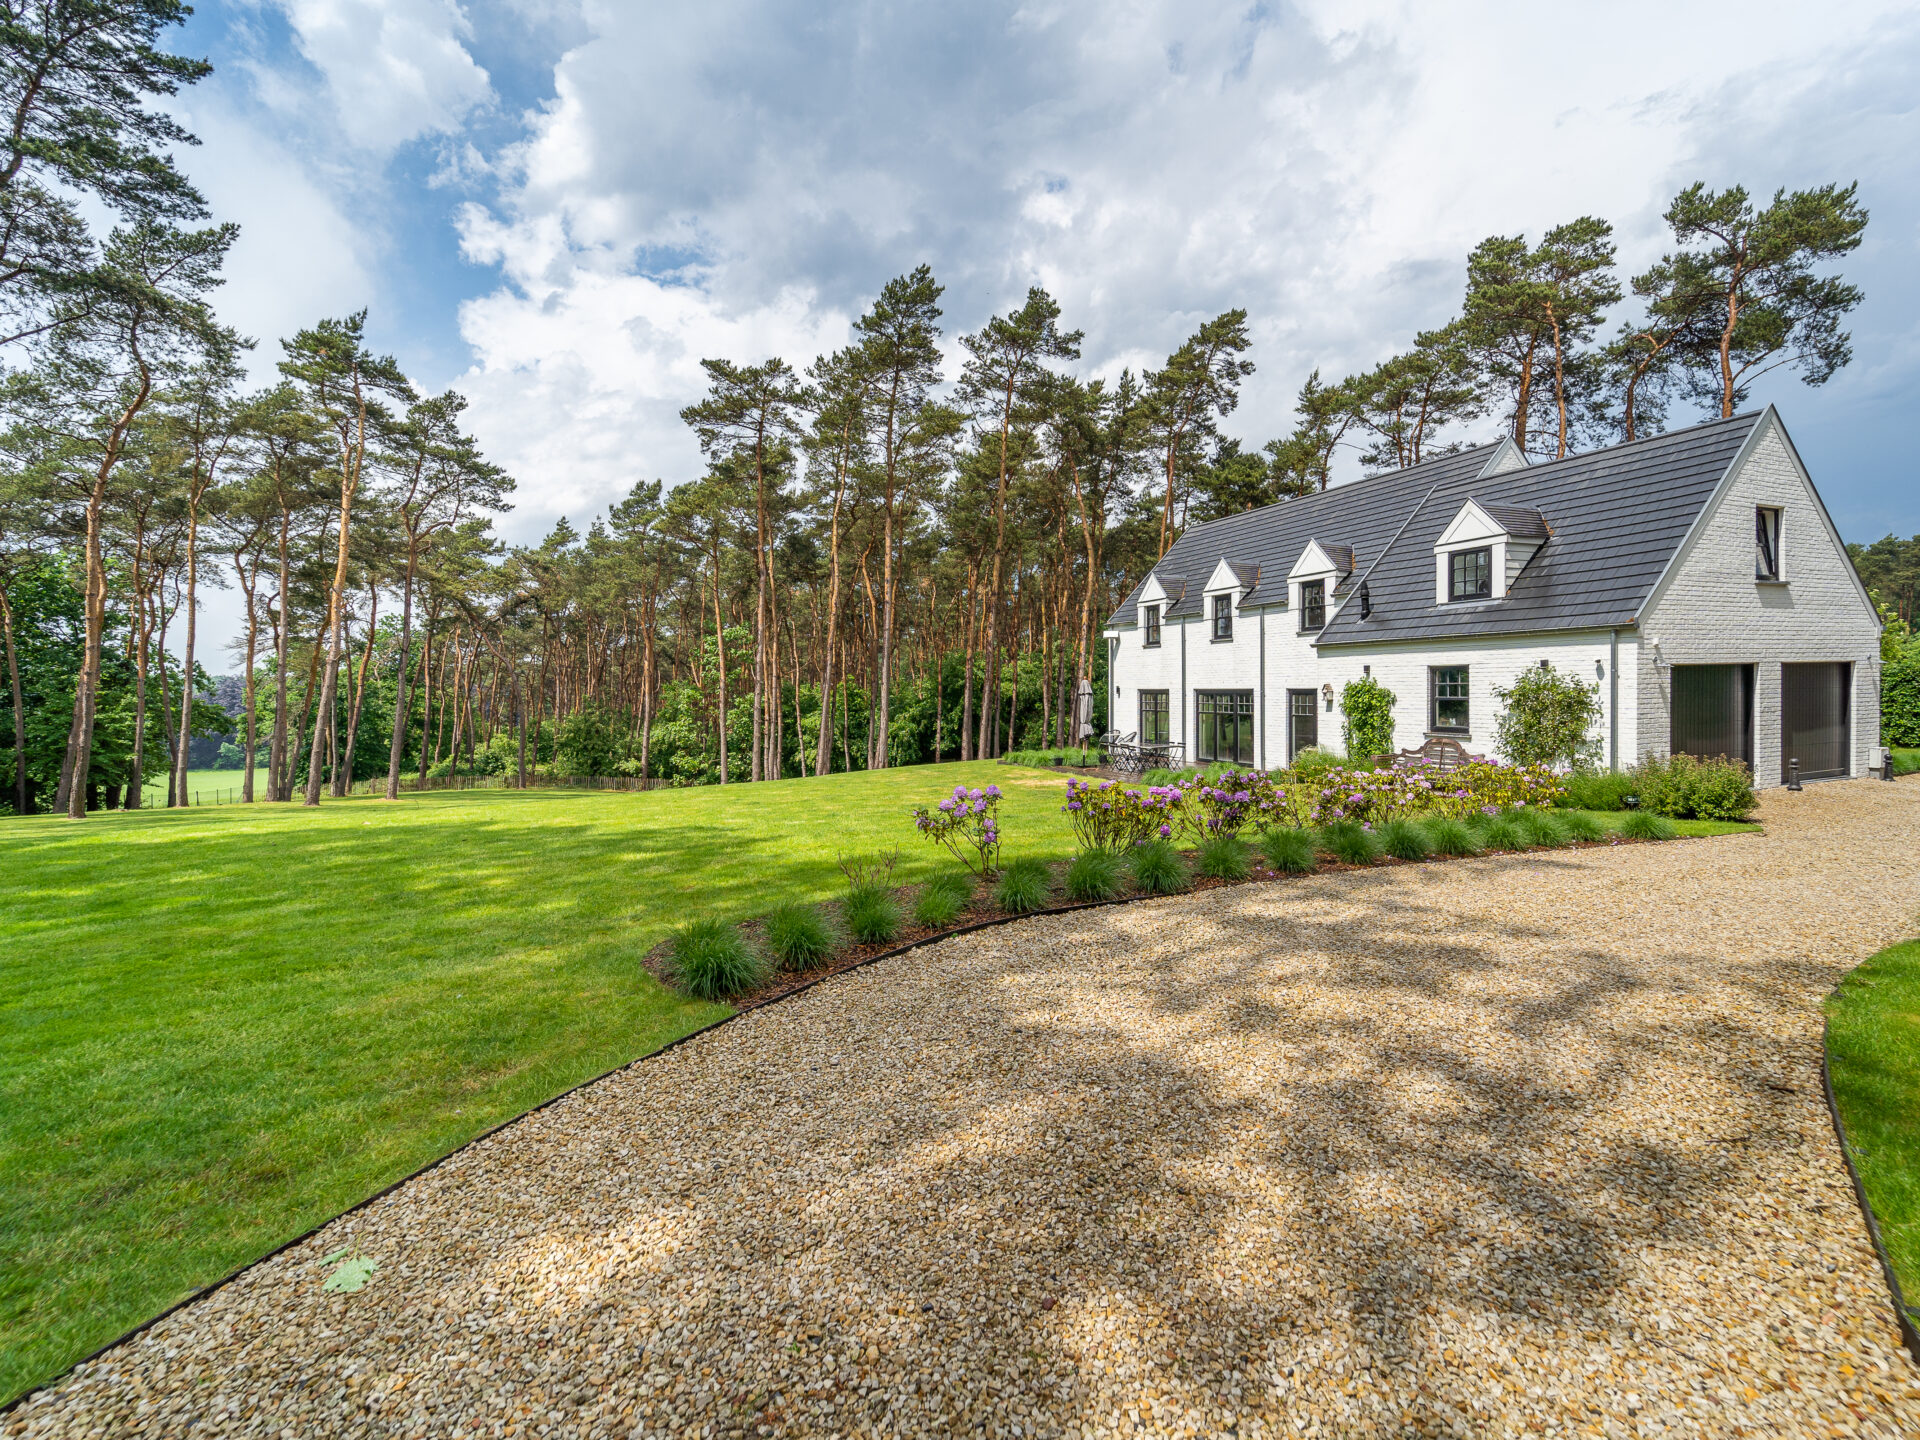 Belgium Sothebys Int. Realty July 2022 Significant Successes